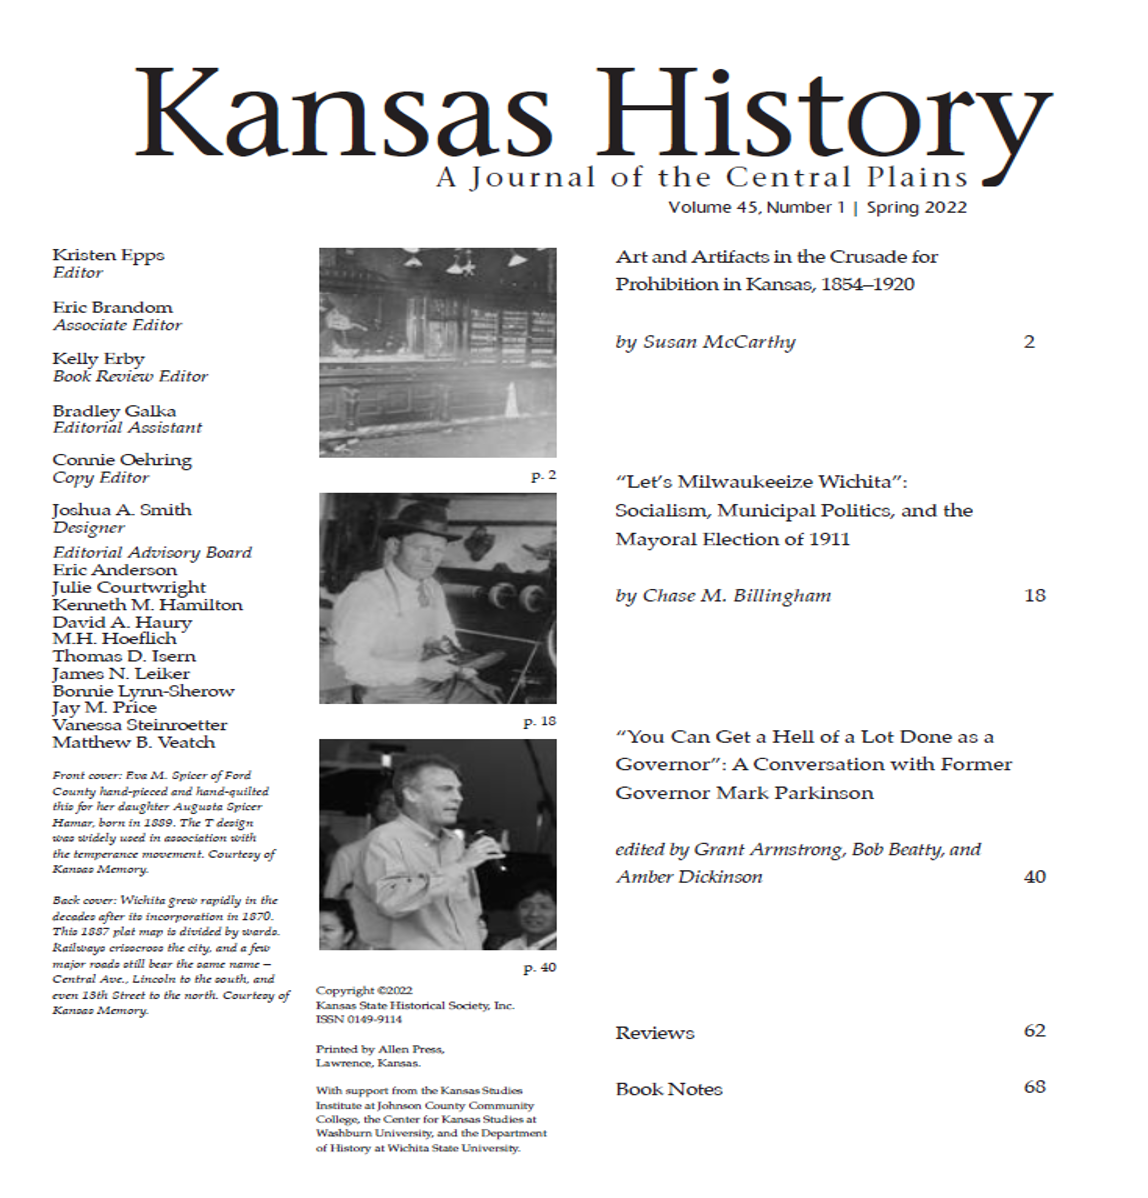 Kansas History Spring 2022 Table of Contents